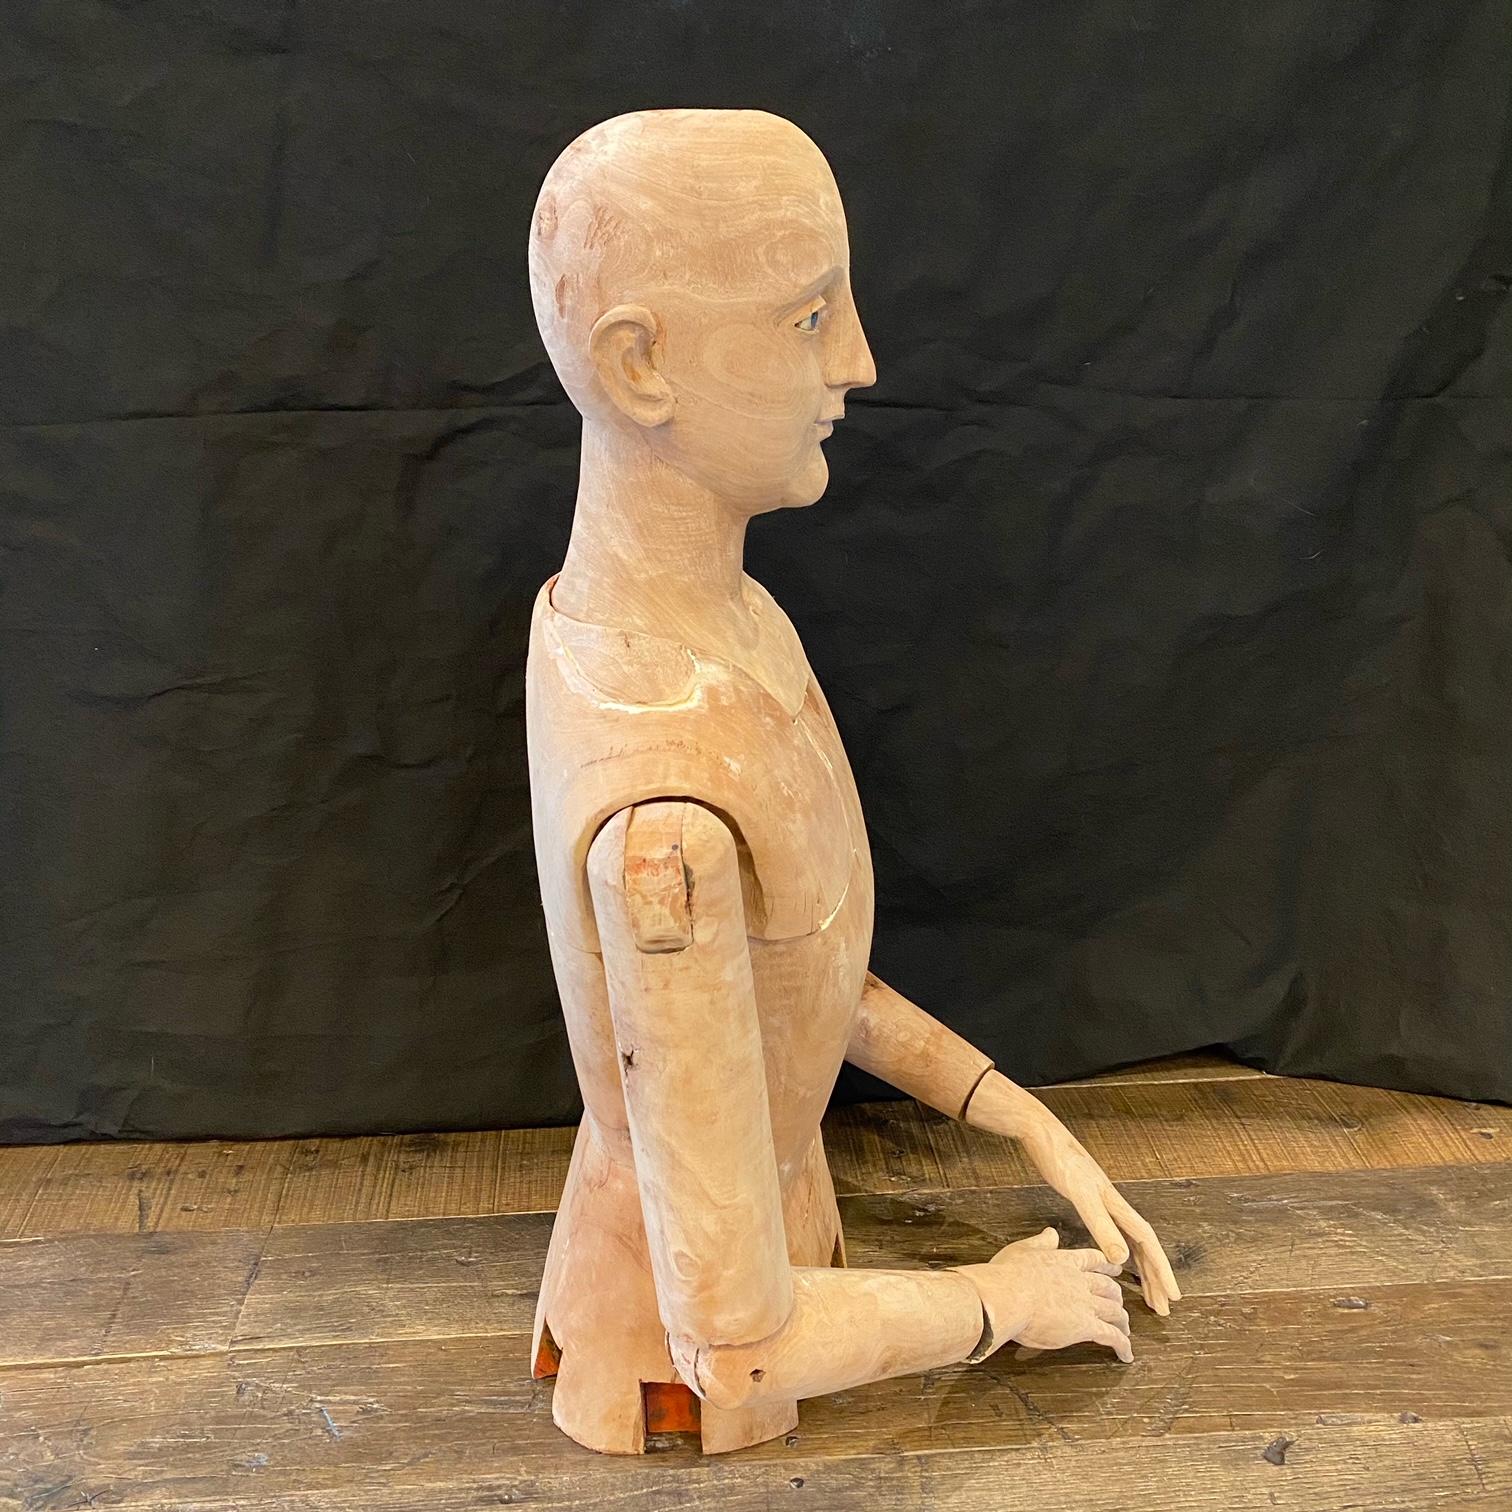 Antique French sculpted and carved wood mannequin was recently restored and is striking in its life size scale and piercing blue painted eyes. Arms and head remove for shipping. #5376:
Bust: H 14.5” x W 8” x D 8.5”.